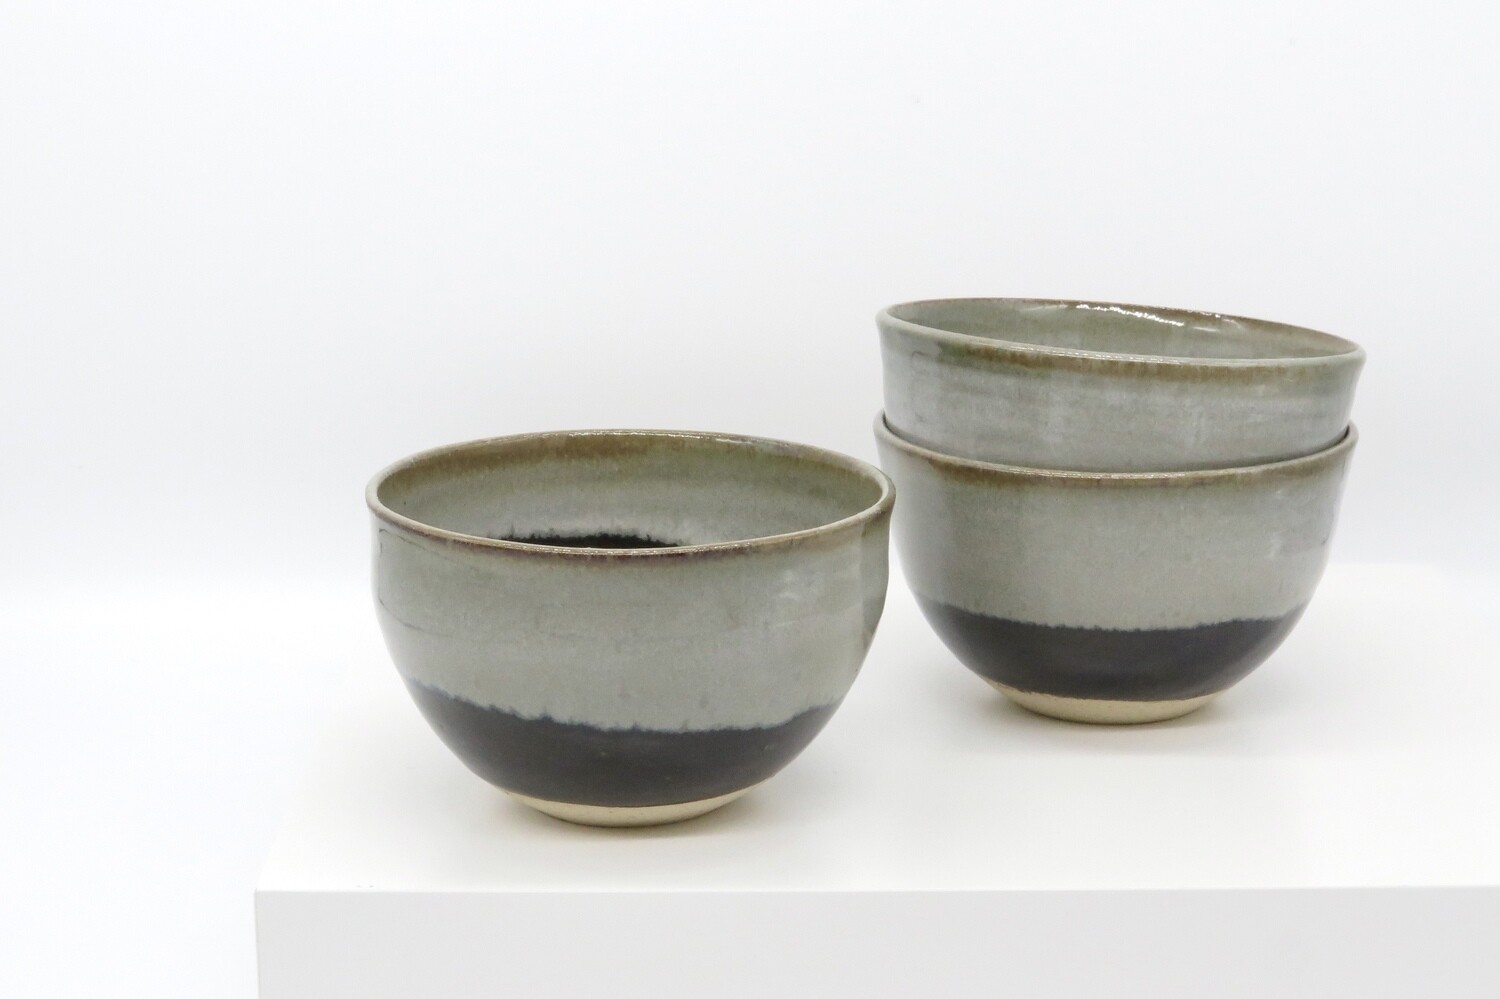 Rice Bowl - Black and mottled grey.